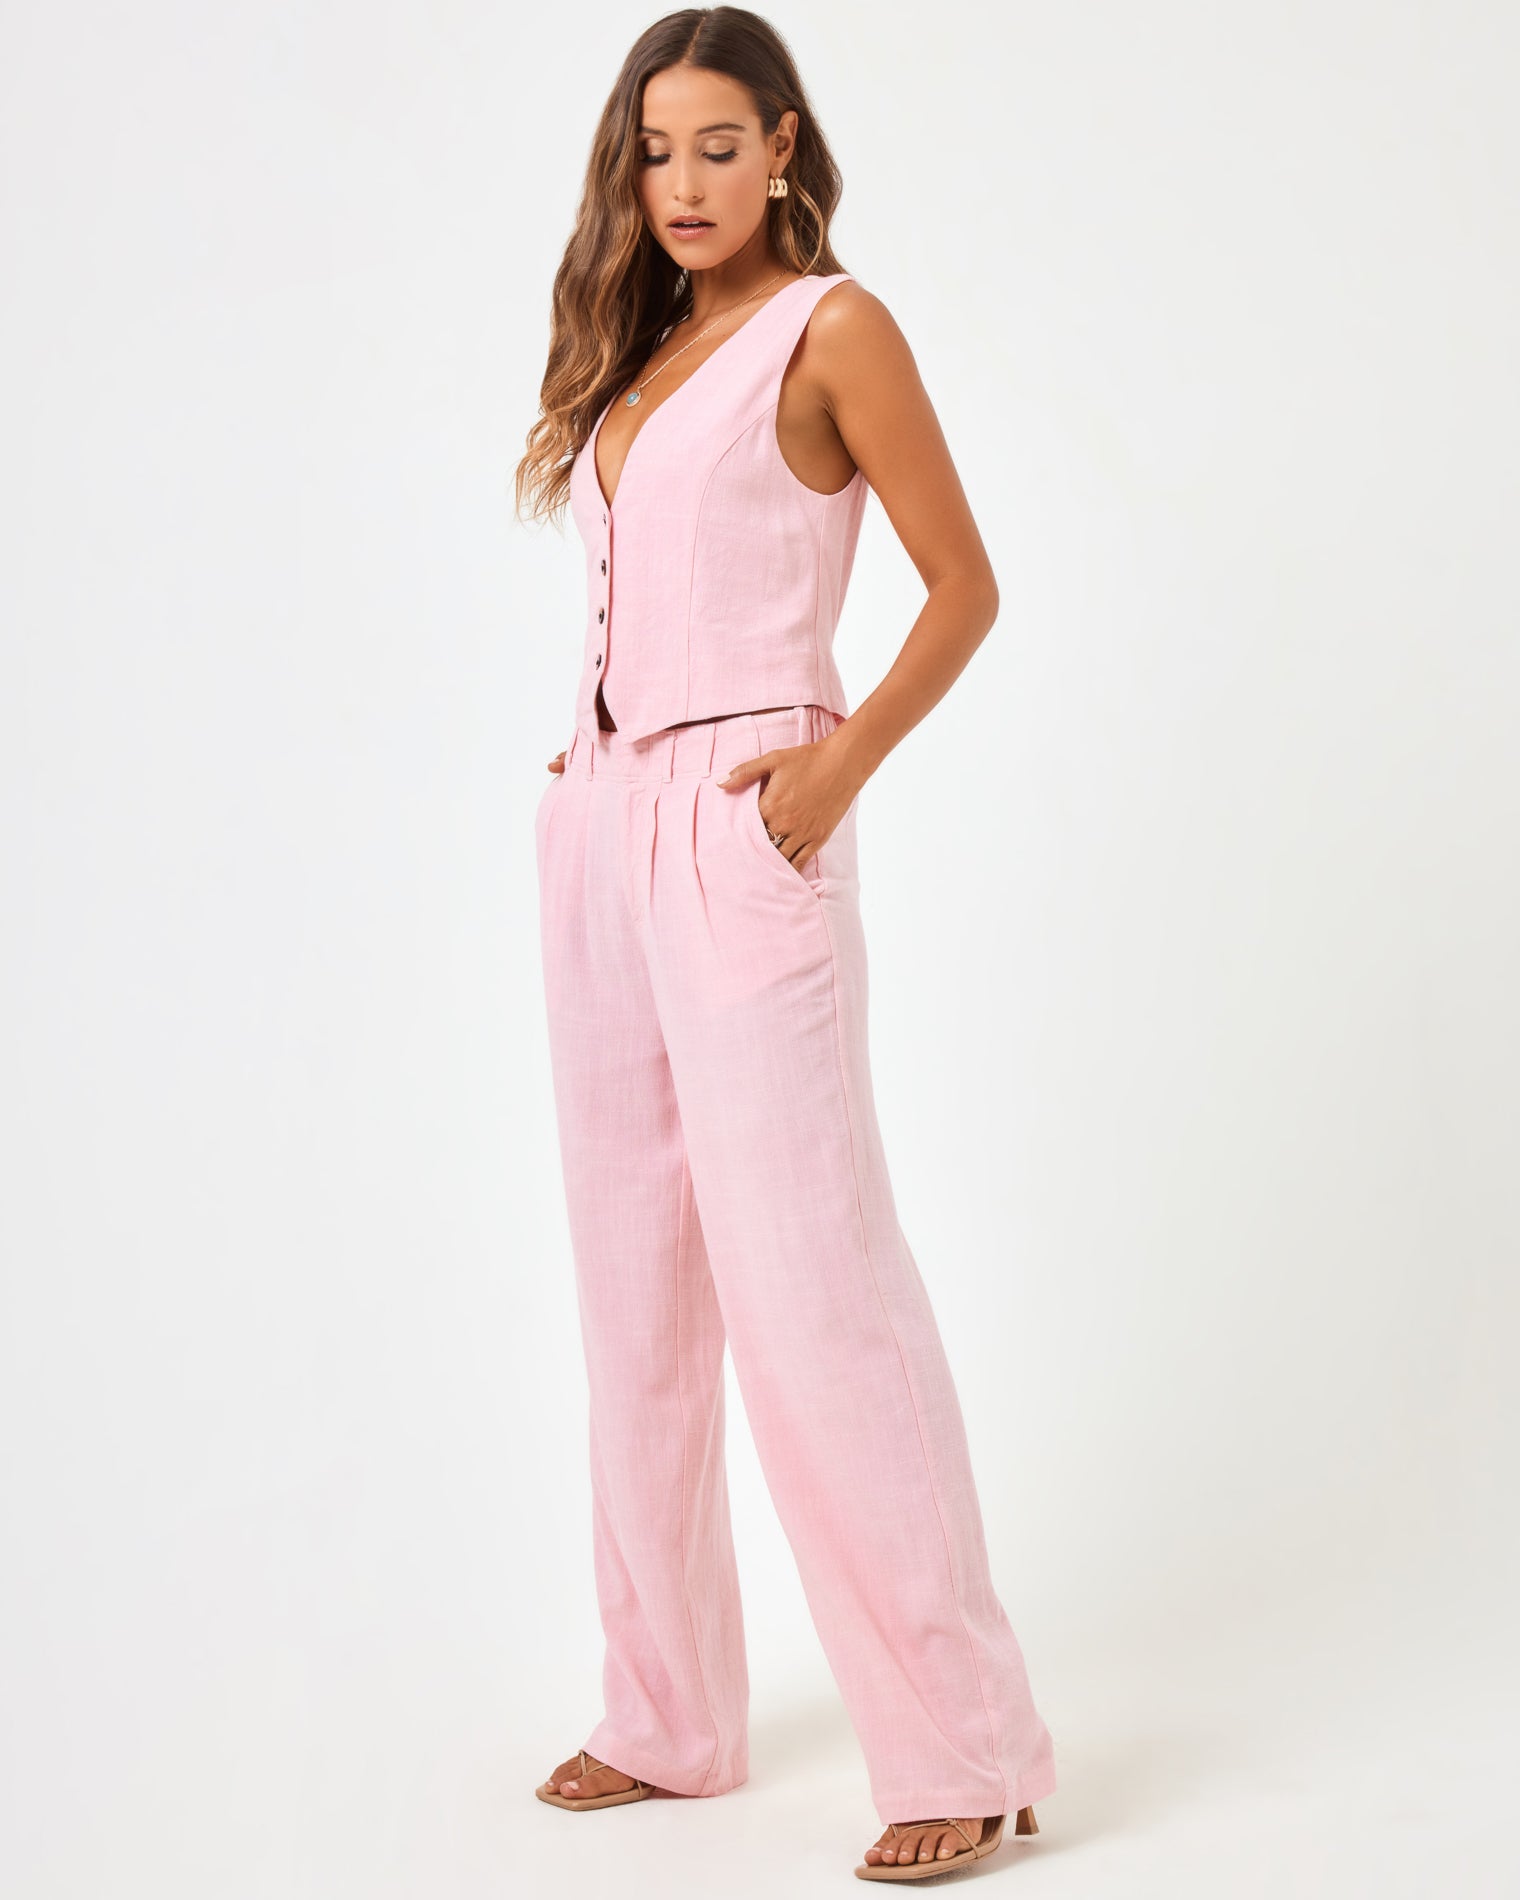 Rhodes Pant - Macaroon Pink Macaroon Pink | Model: Anna (size: S) | Hover